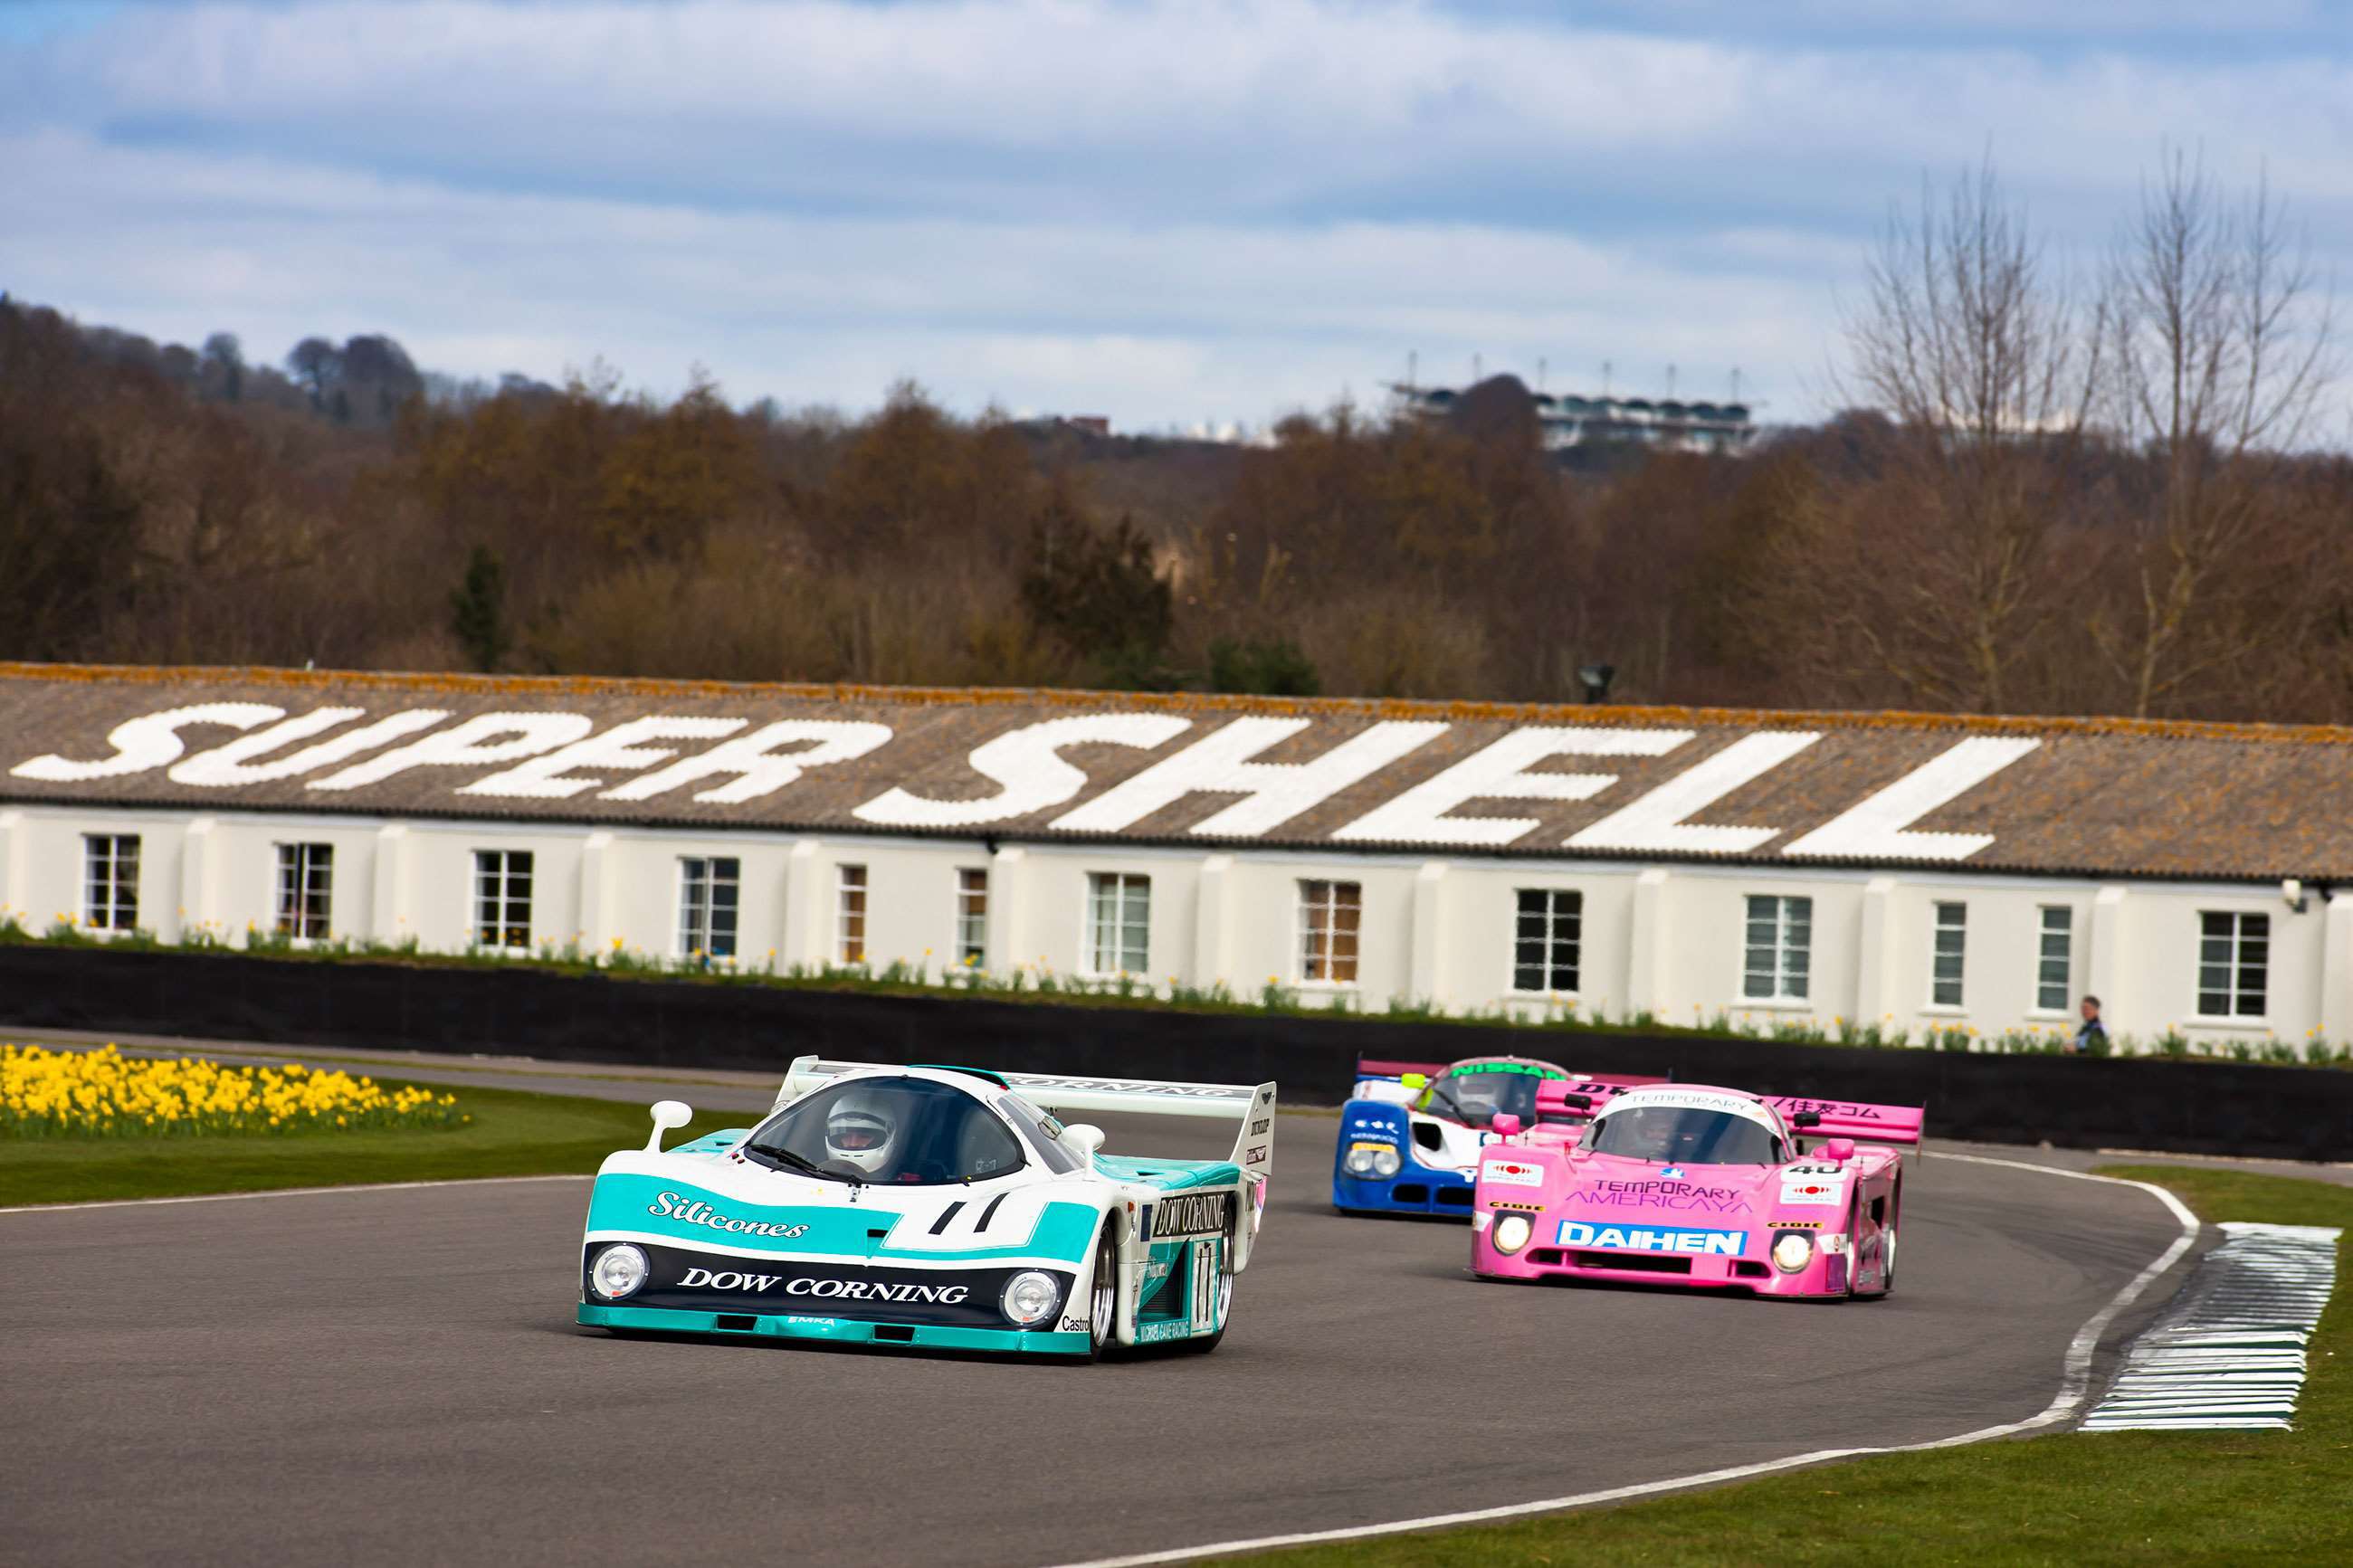 members-meeting-favourite-moments-stream-timetable-2020-73mm-drew-gibson-group-5-goodwood-26032020.jpg